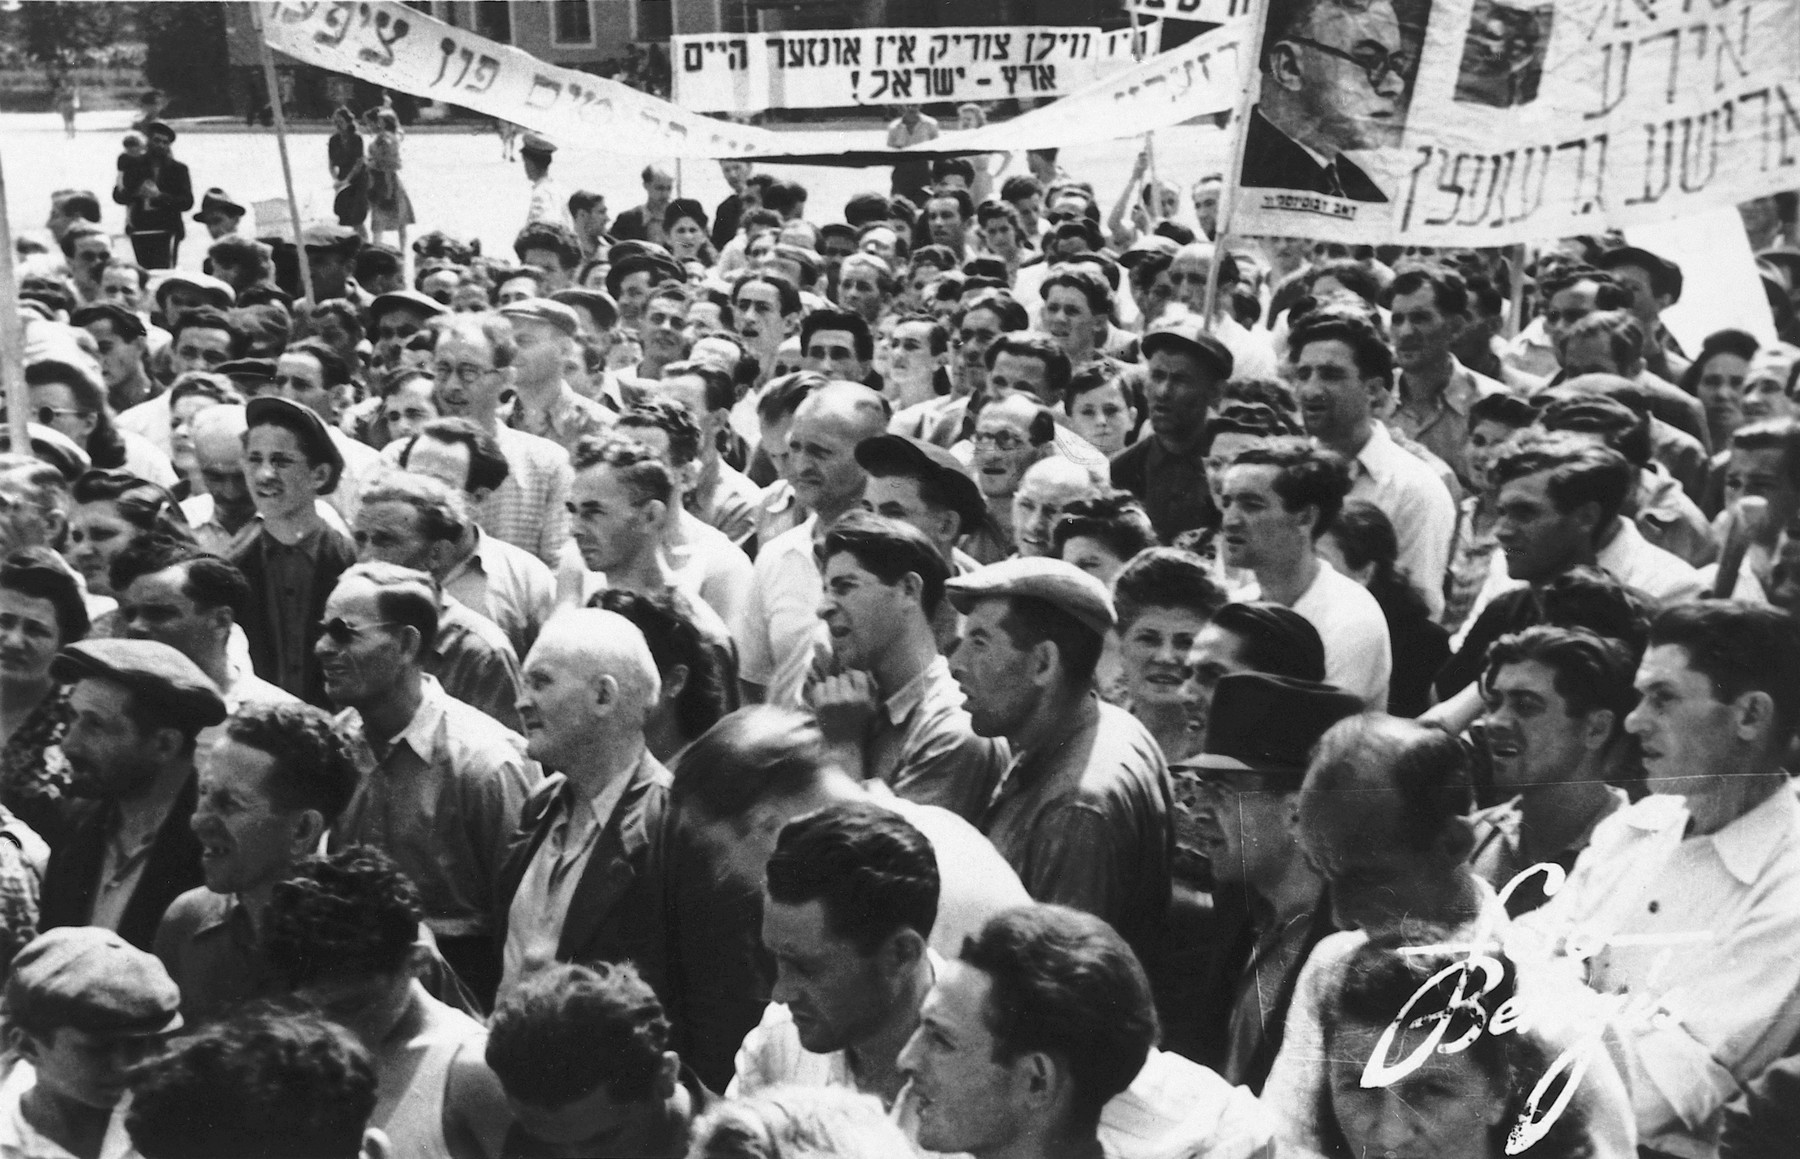 Jewish DPs celebrate the partition of Palestine in a large demonstration in the Stuttgart displaced person's camp.